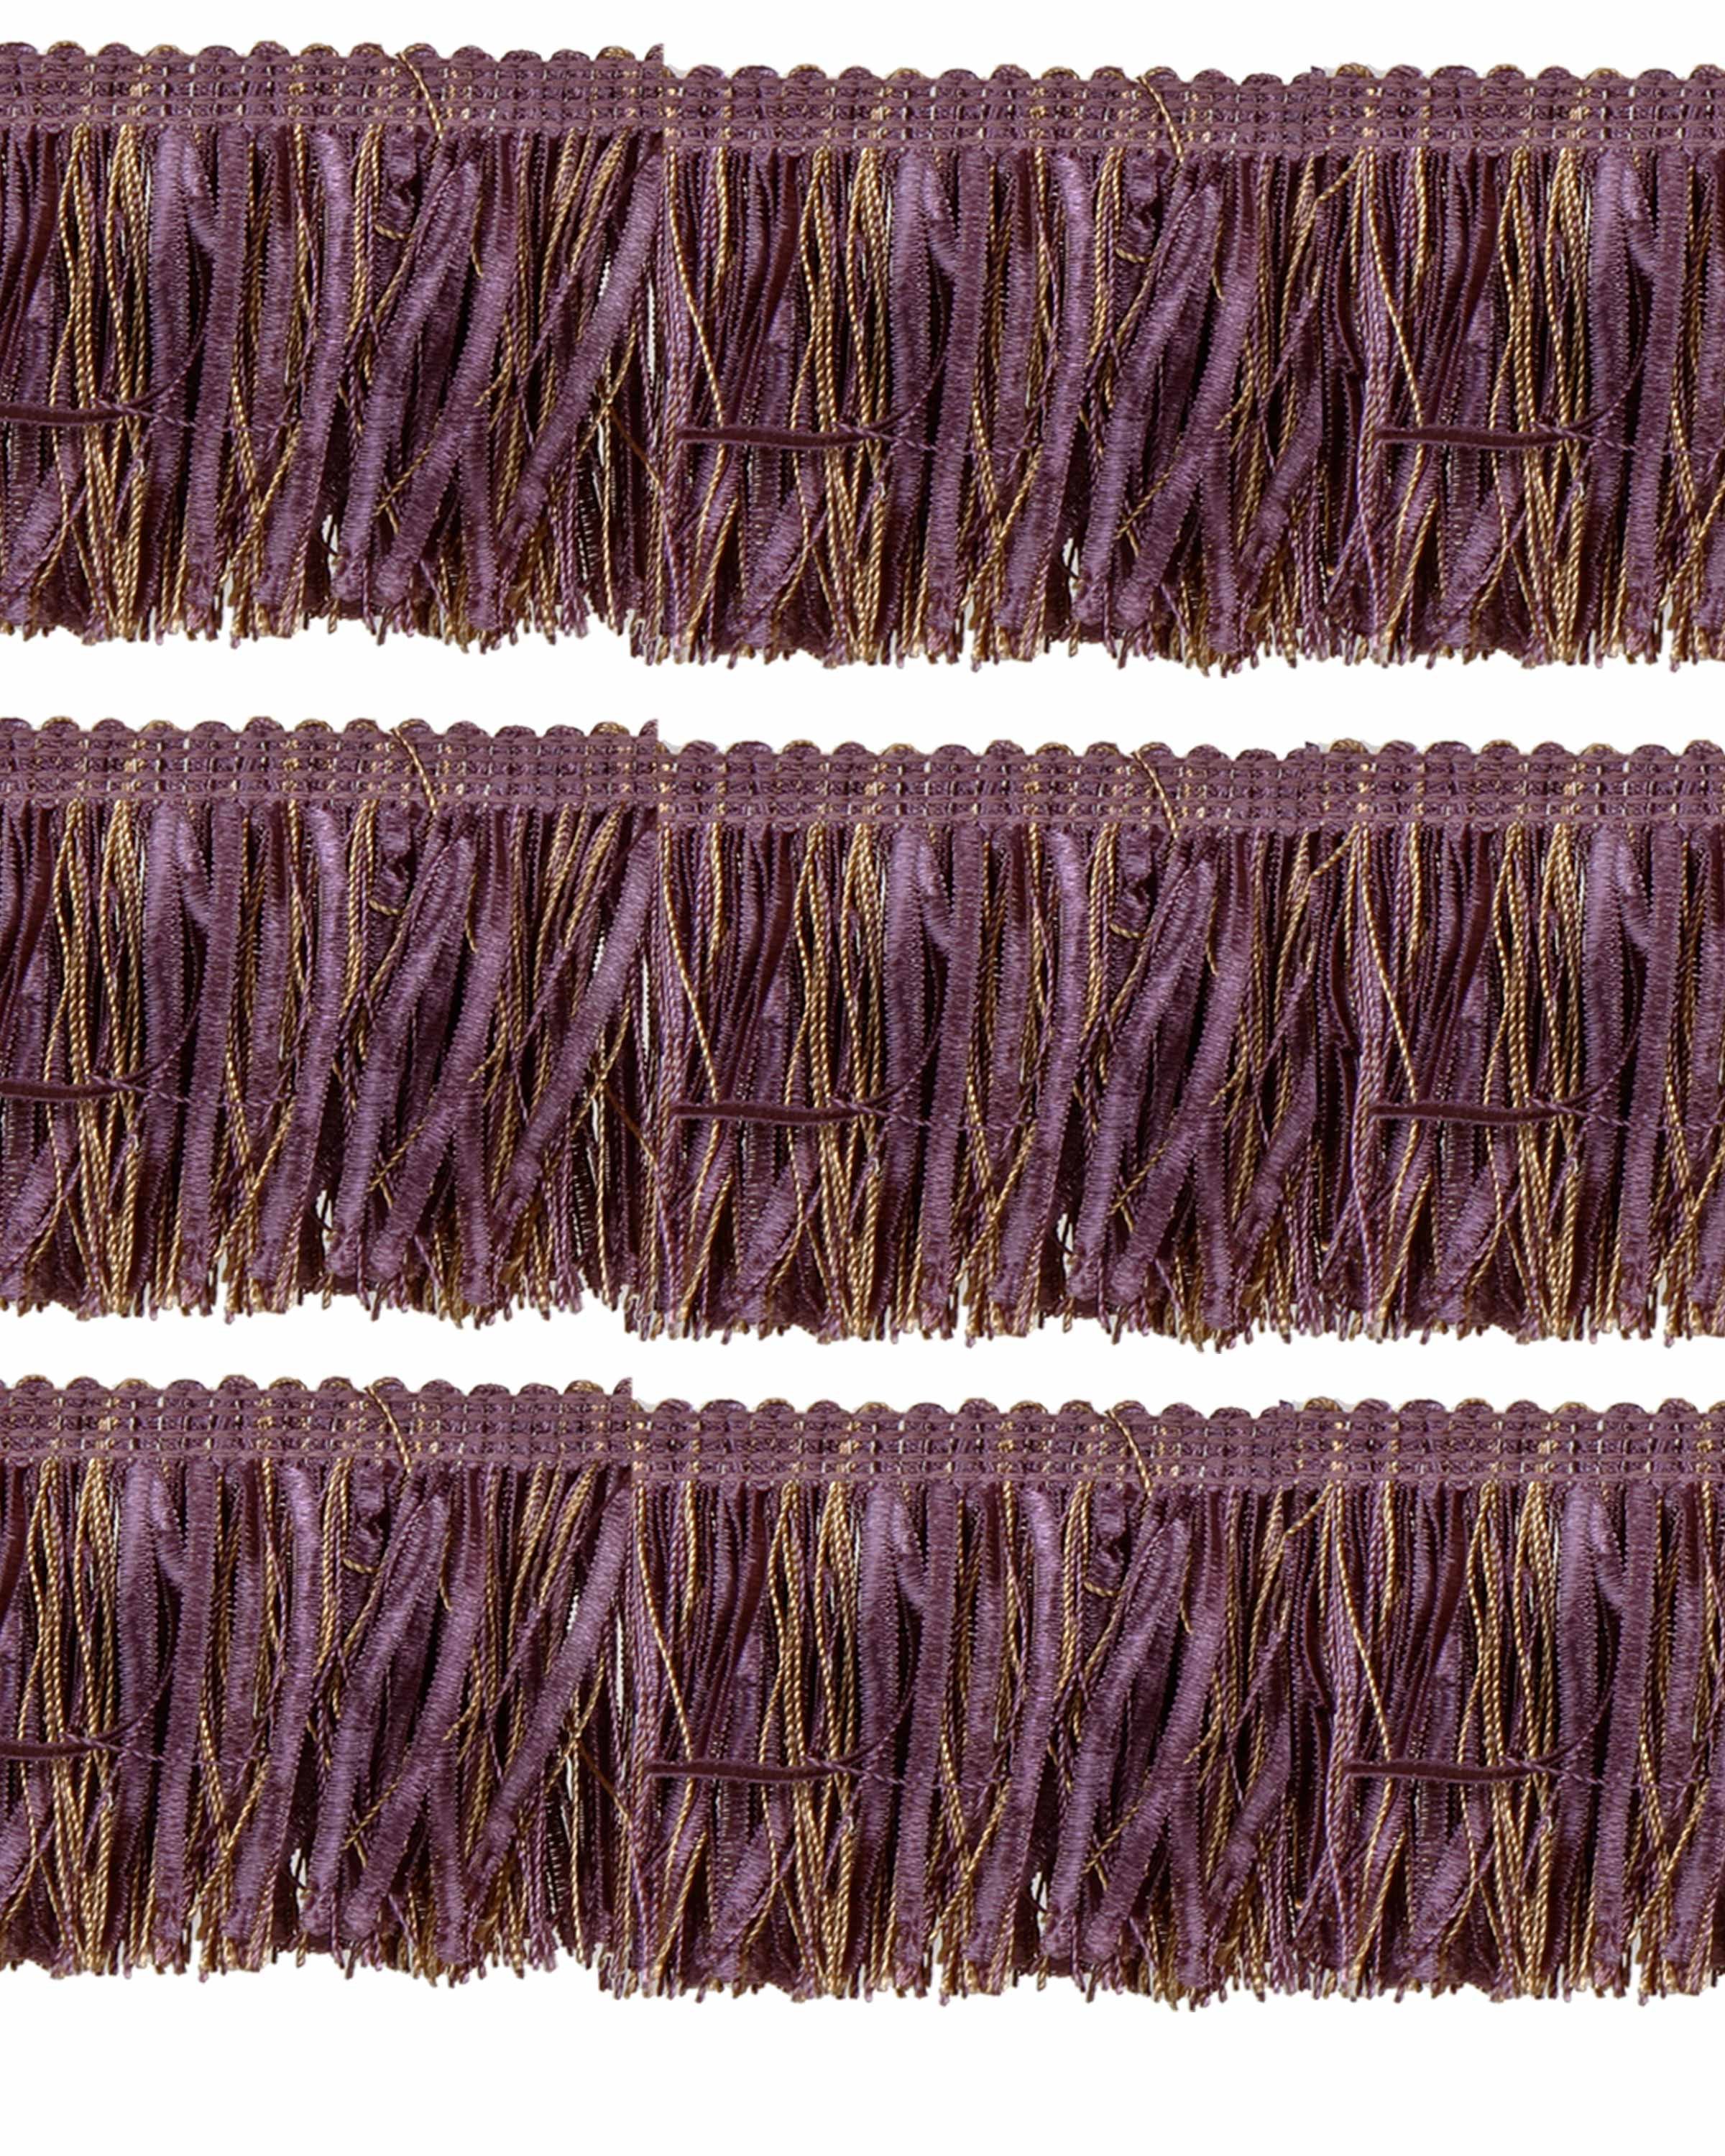 Bullion Fringe with Ribbons - Purple / Gold 60mm Price is for 5 metres